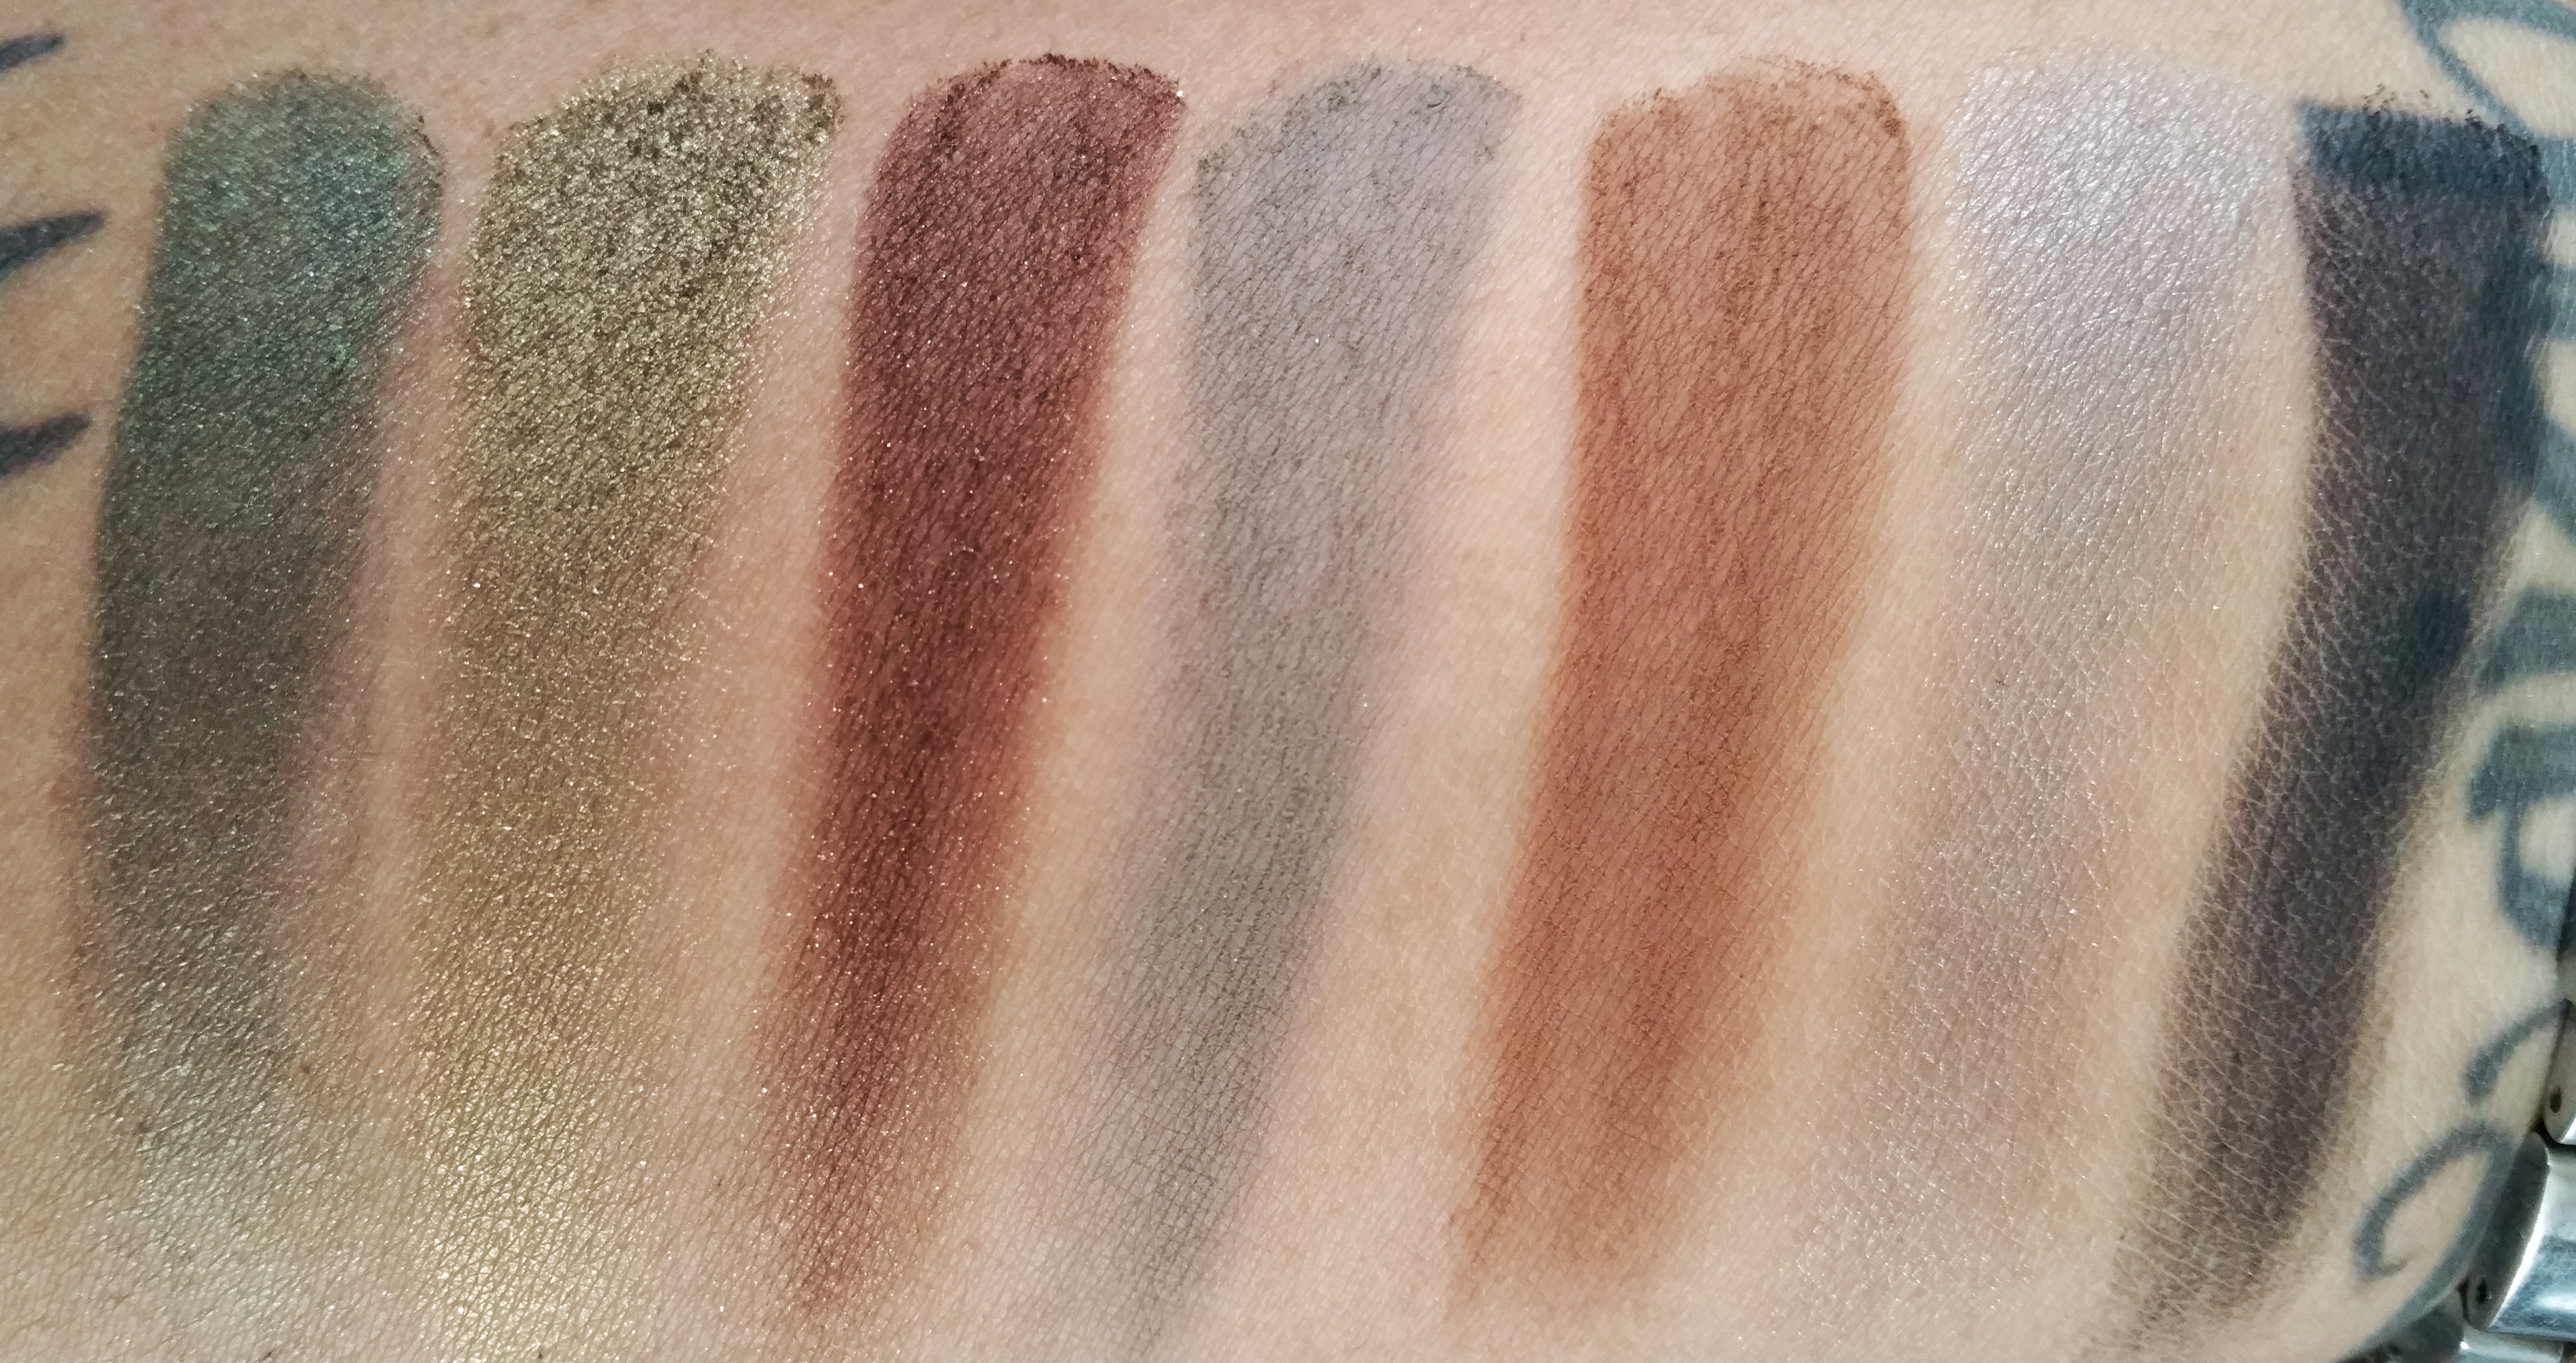 eye shadows, makeup, Beauty Junkees makeup, cosmetics, review, product review, swatches, single eye shadows, eye shadow palette, eye shadow swatches, eye shadow review, beauty products, affordable eye shadows, pigmented eye shadows,